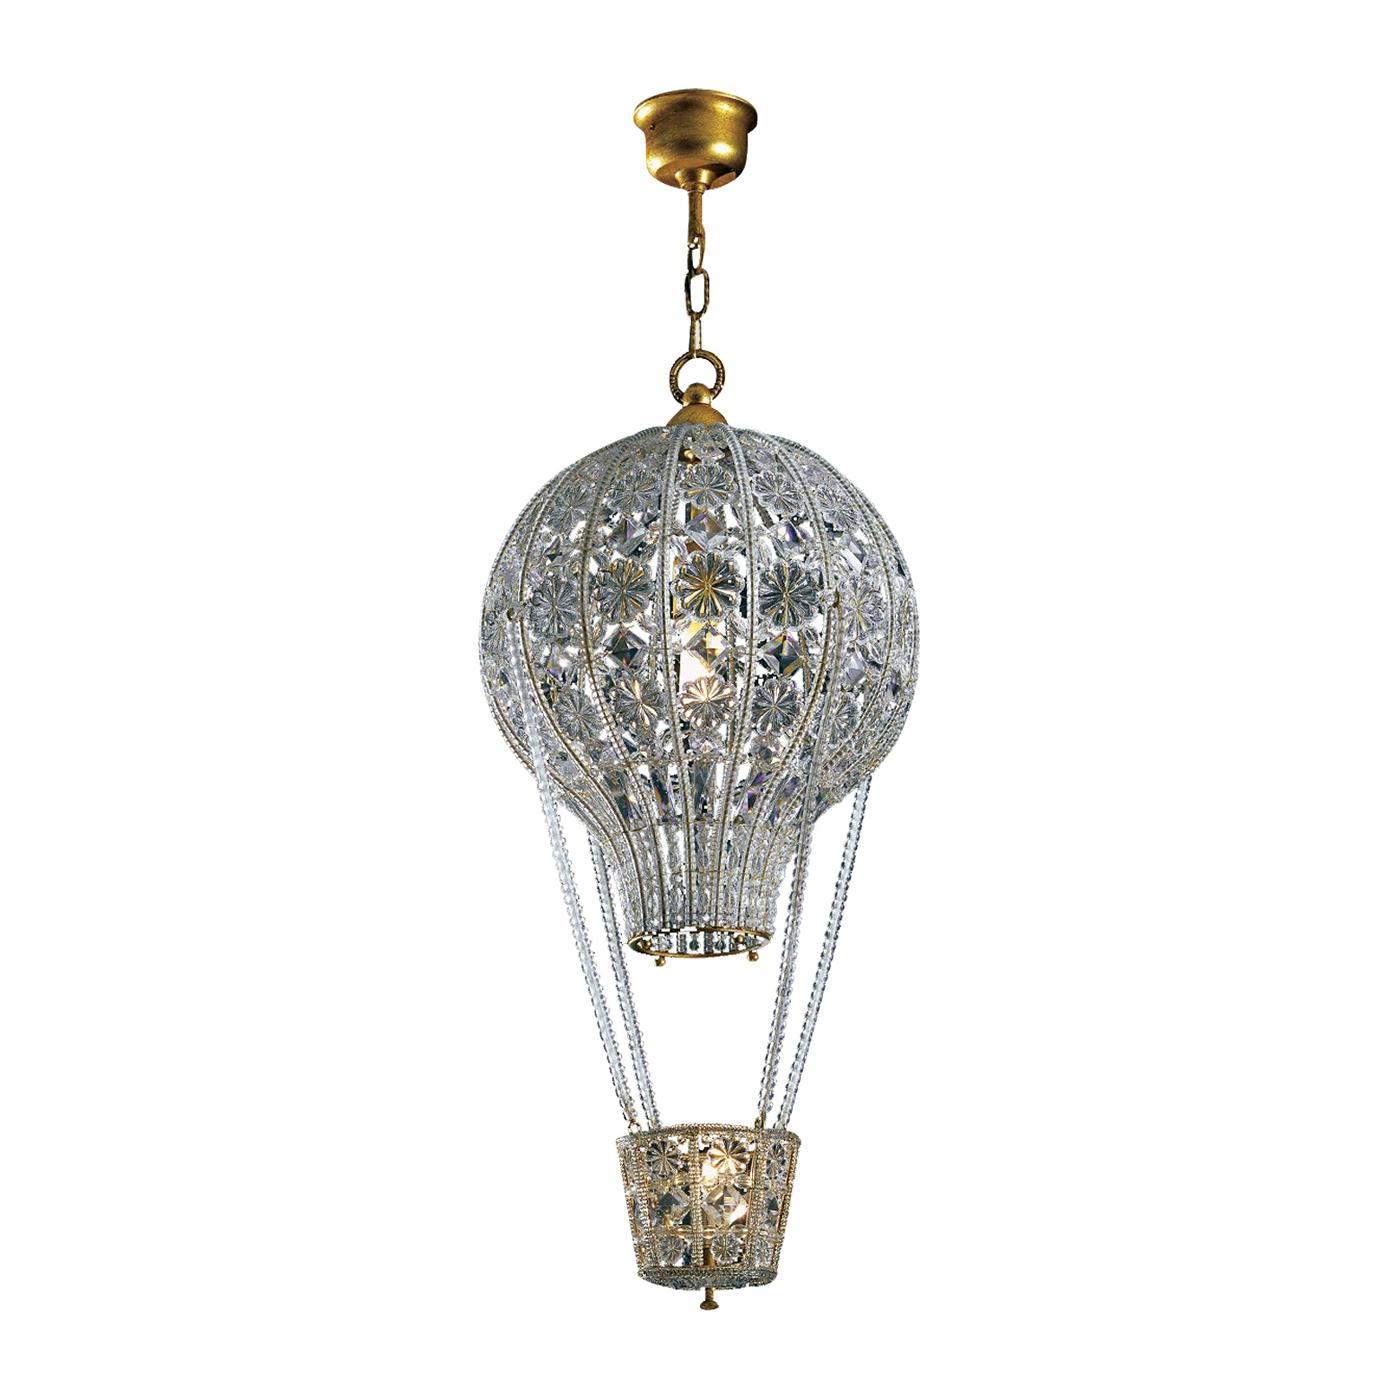 Hot Air Balloon Crystal Chandelier by Banci